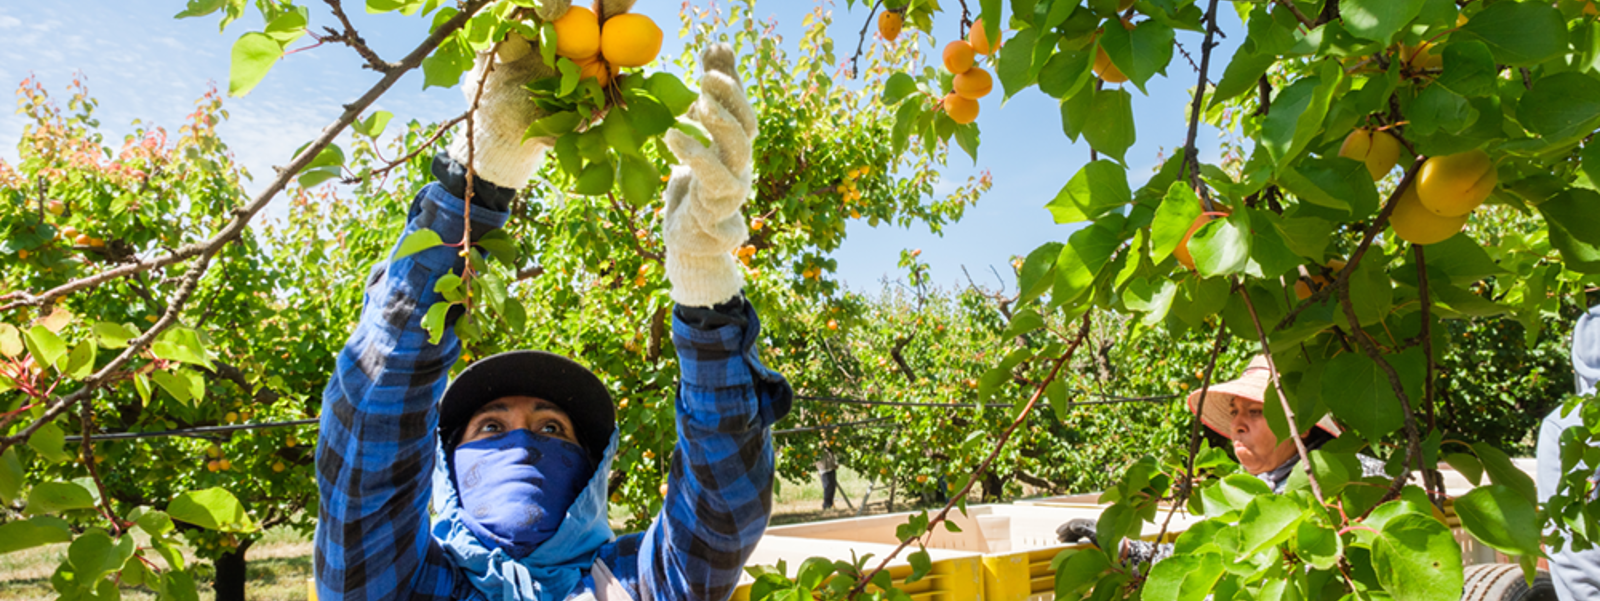 Apricot growers work to rebuild markets